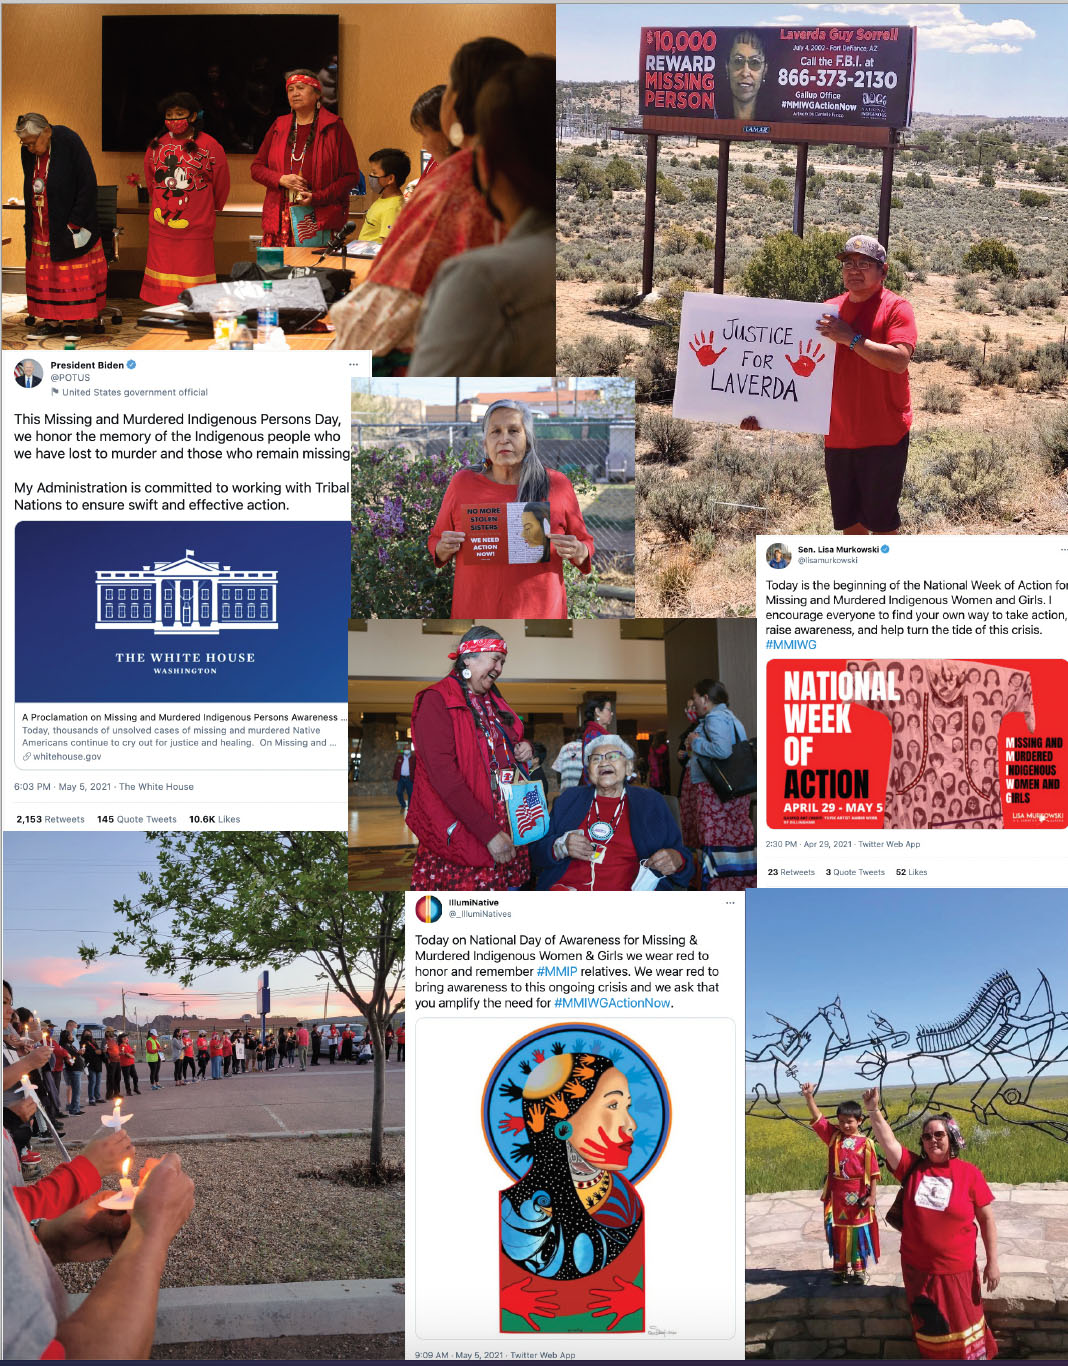 Highlight images from the week of action